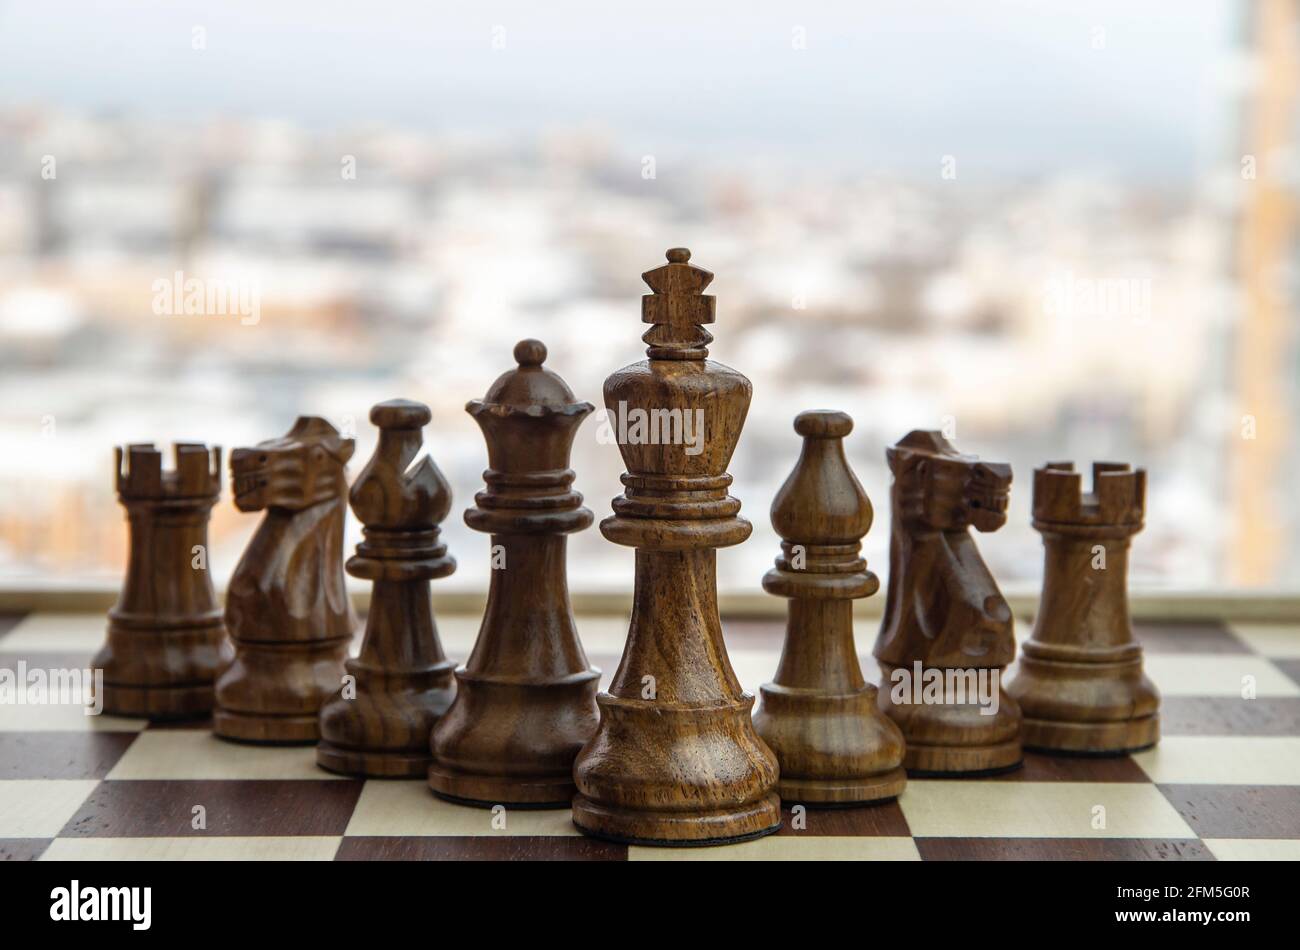 Chess team building strategy - King leadership. Stock Photo